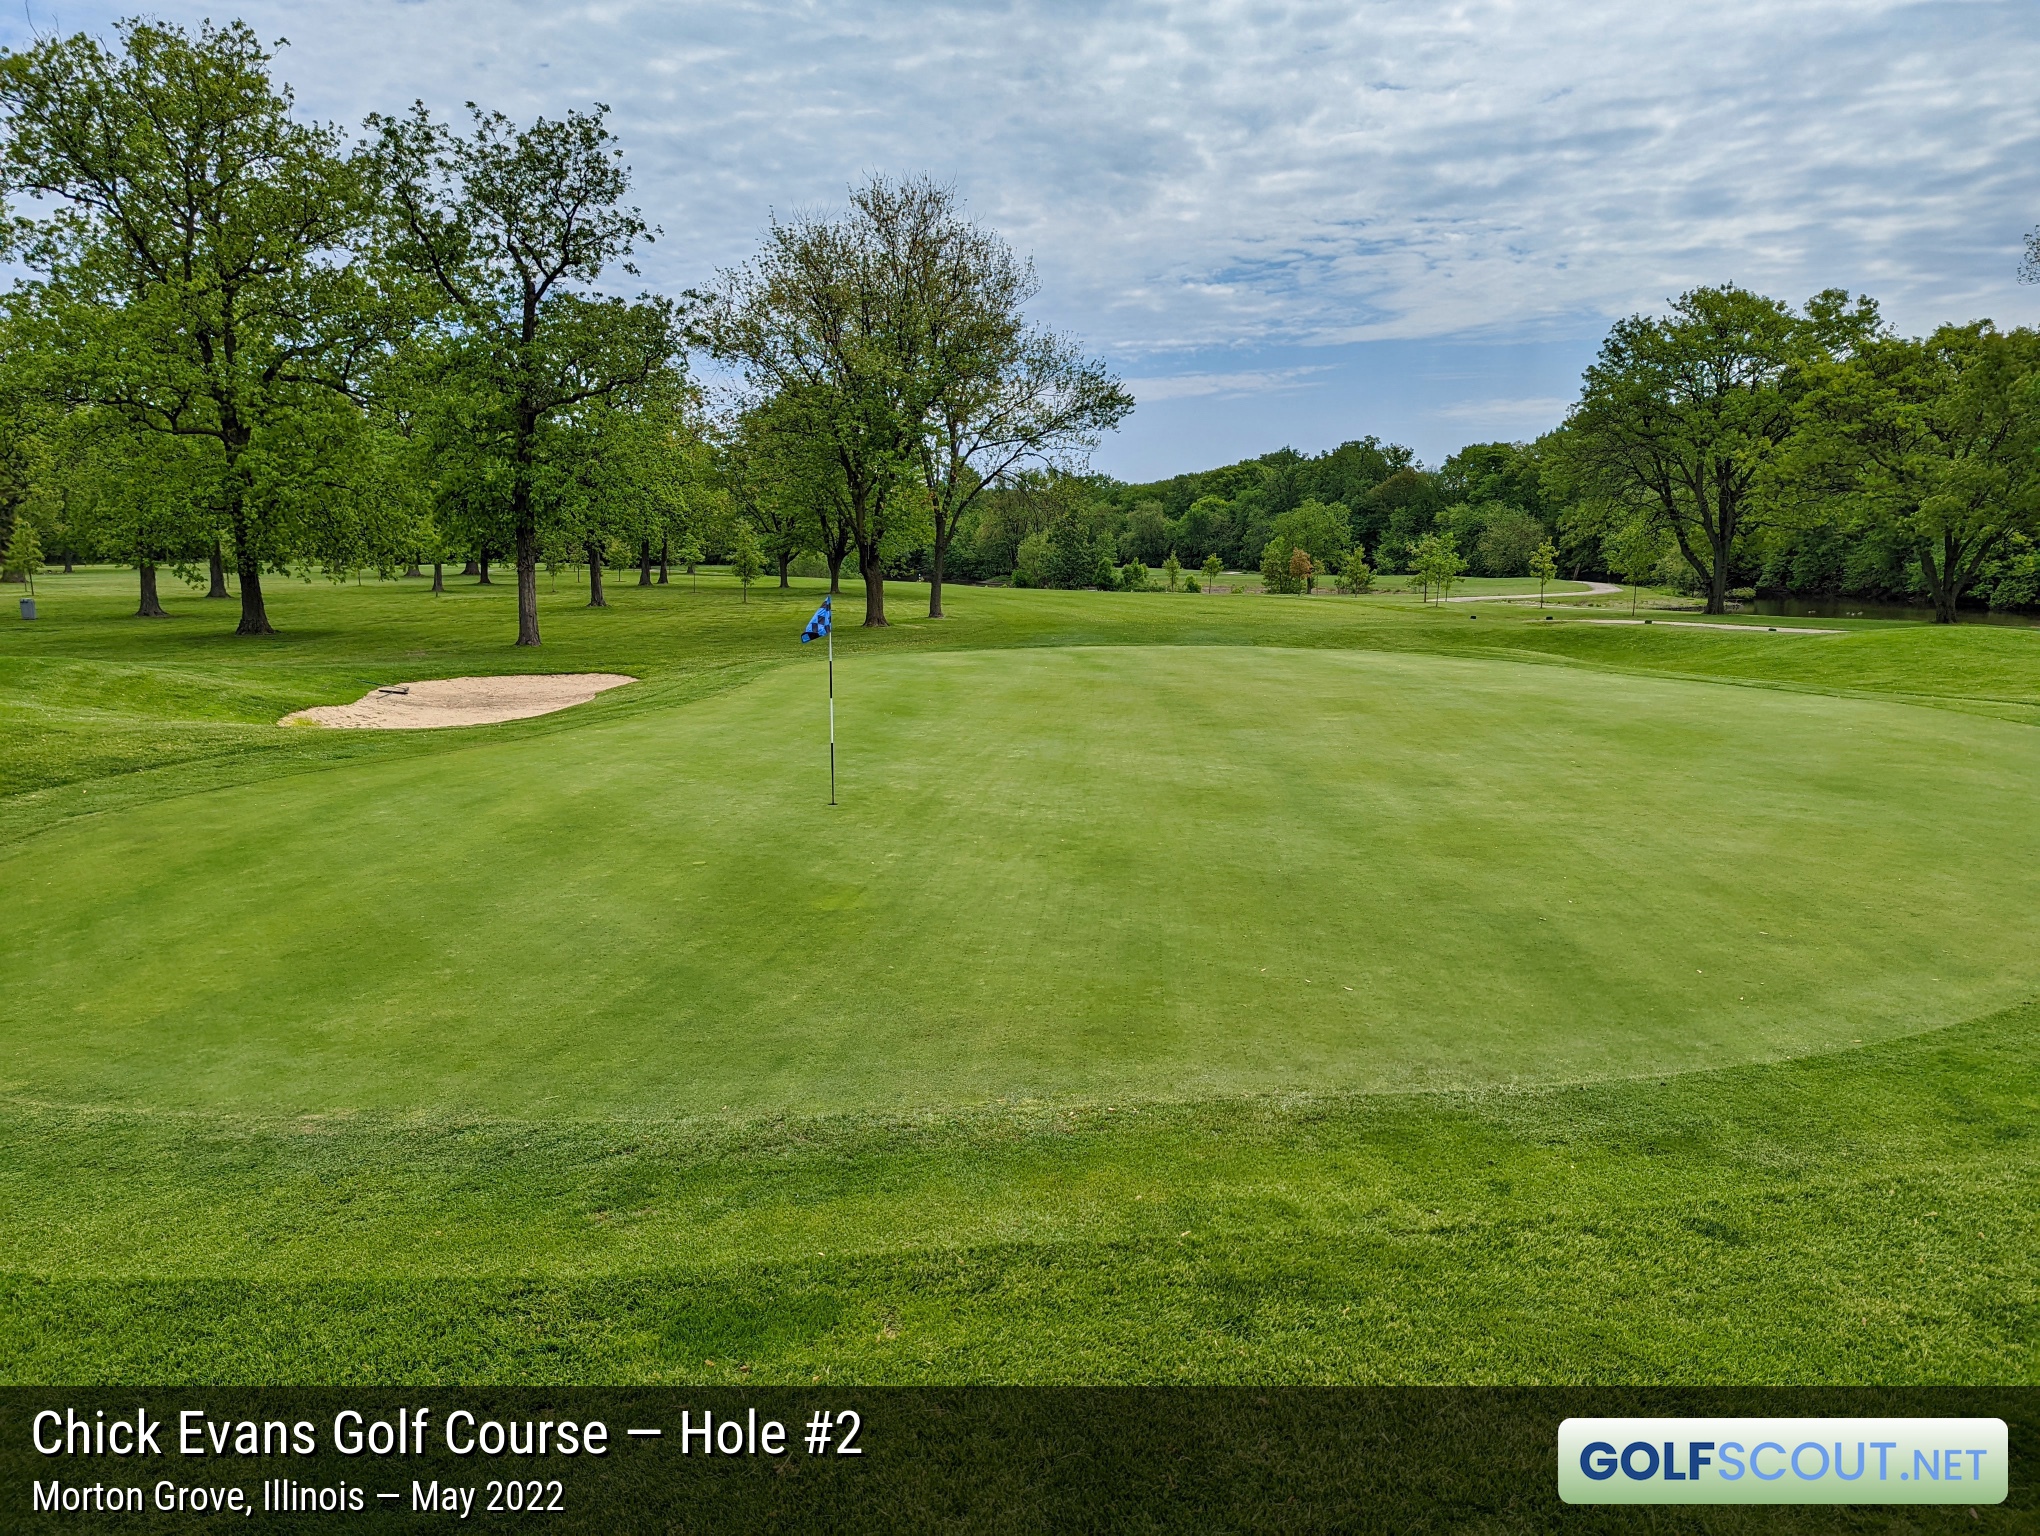 Photo of hole #2 at Chick Evans Golf Course in Morton Grove, Illinois. 